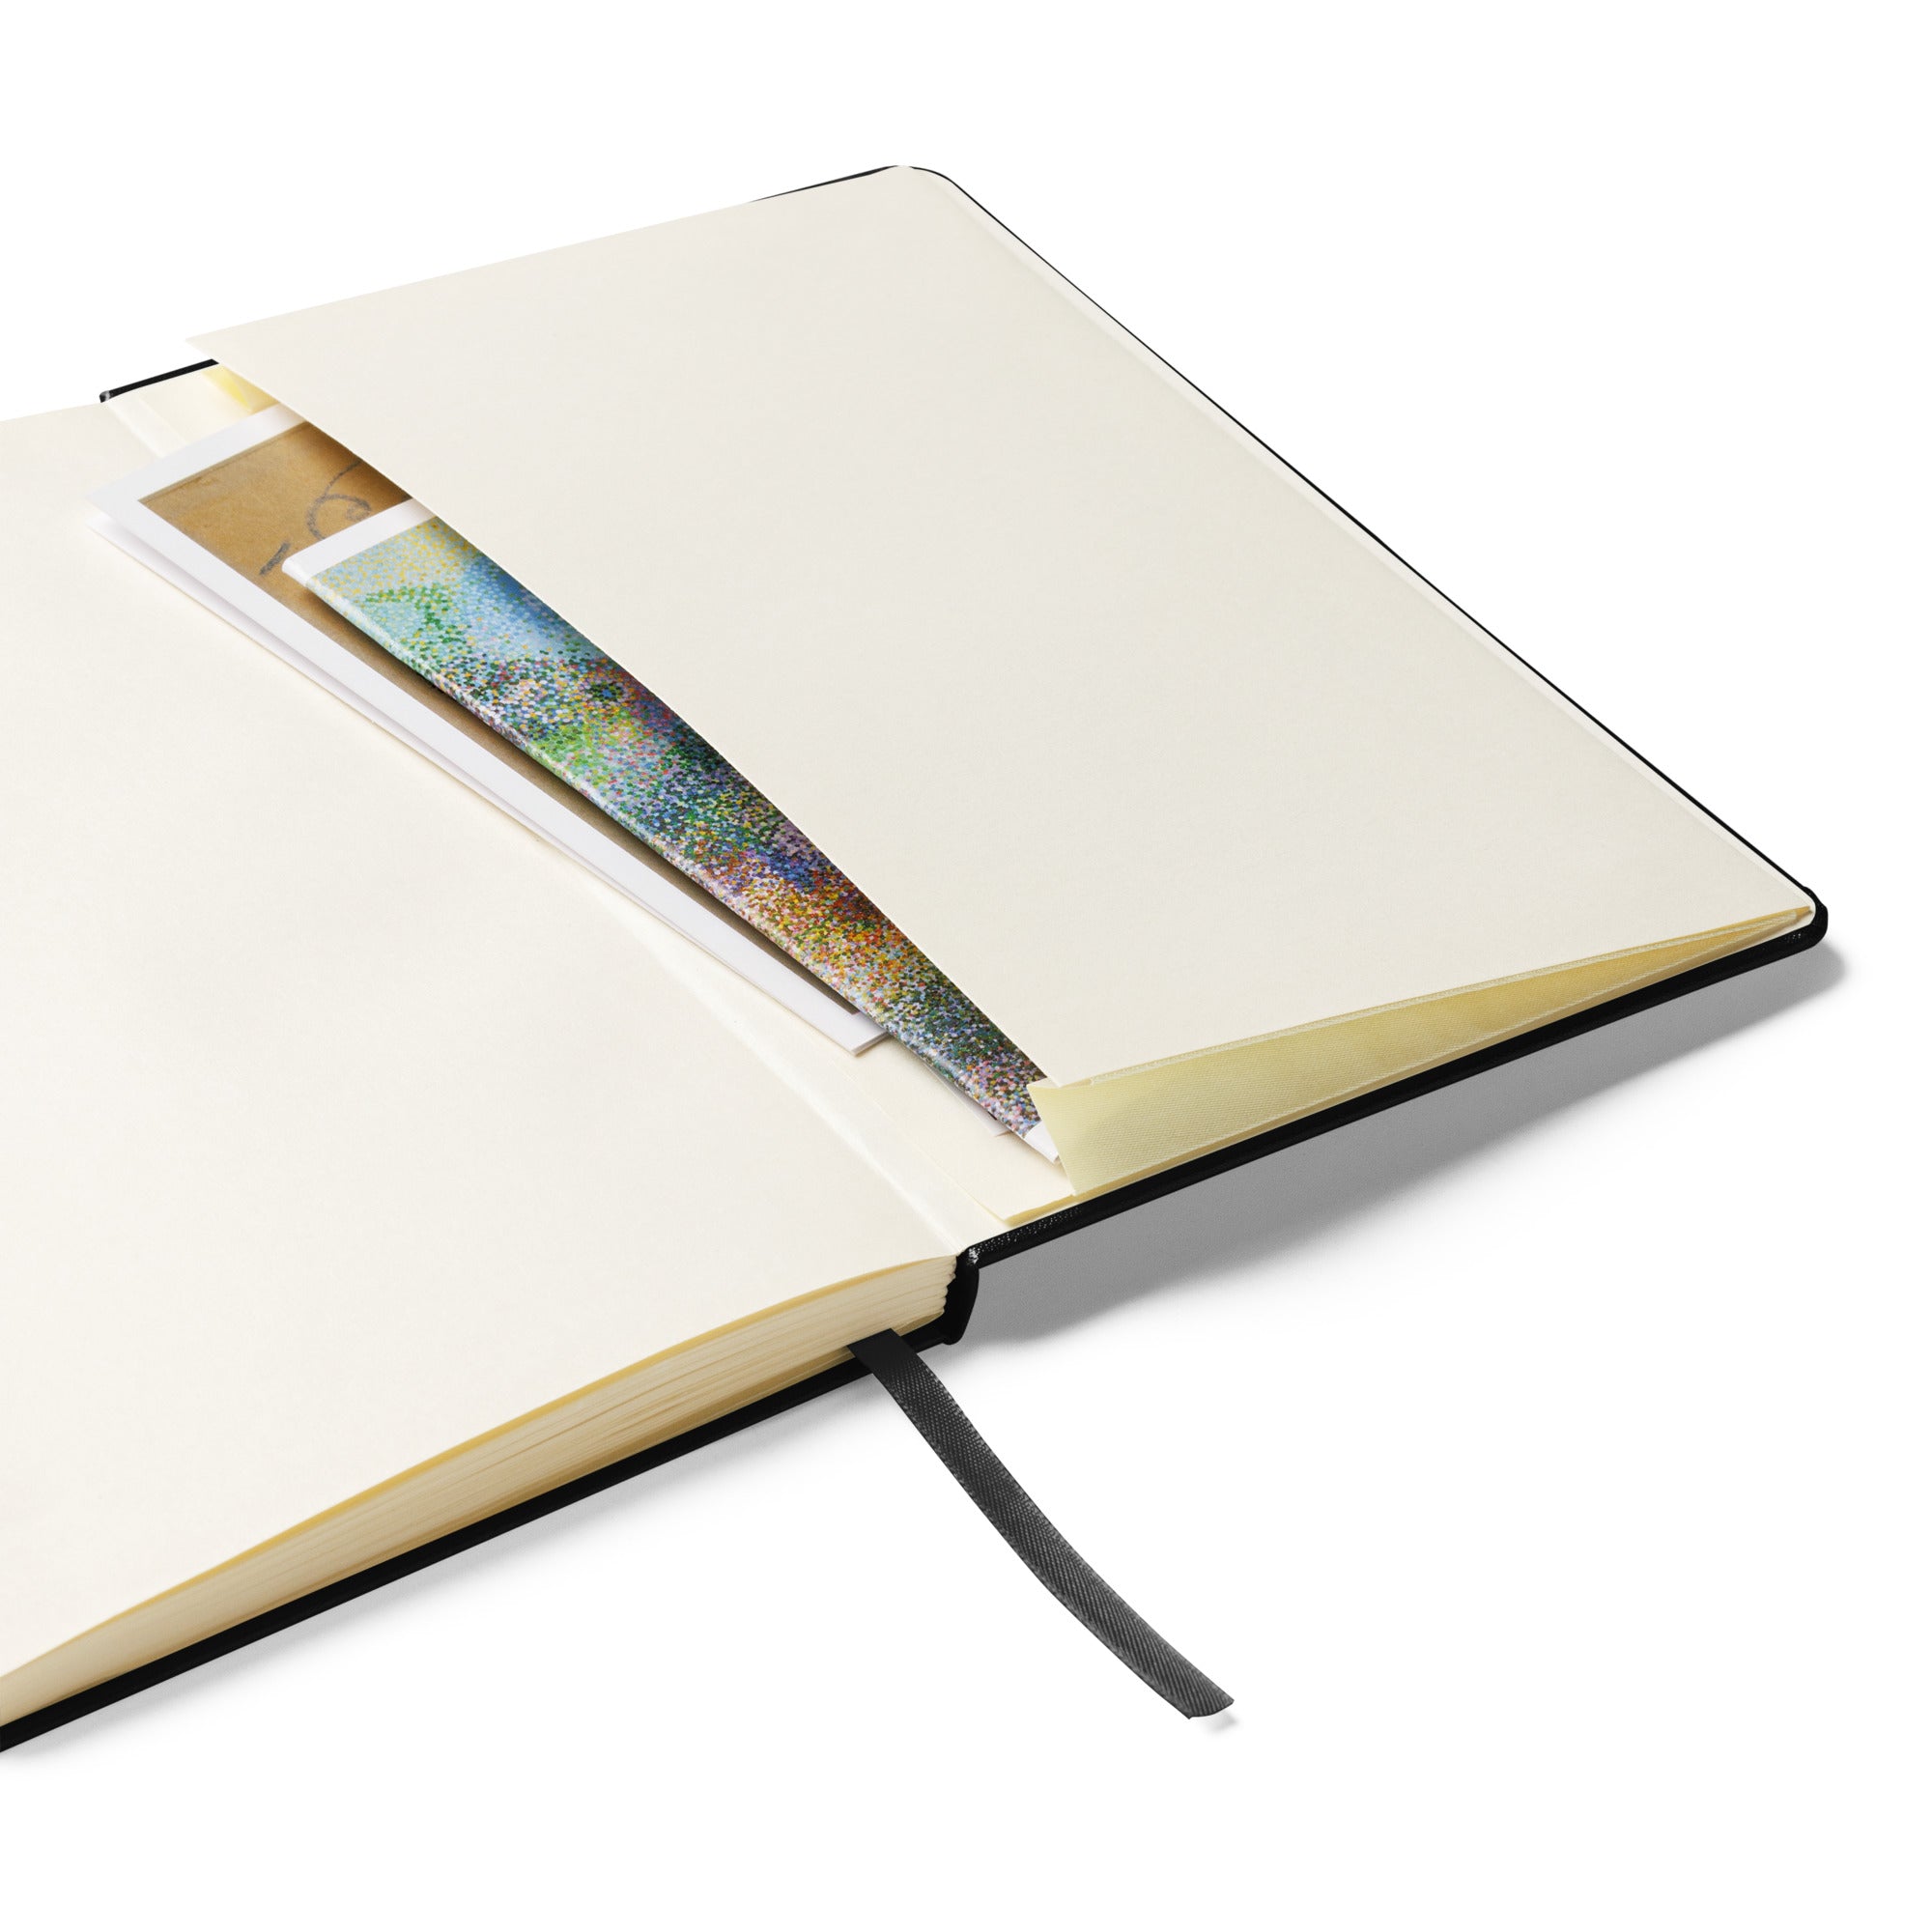 Earth Magic - Hardcover bound notebook